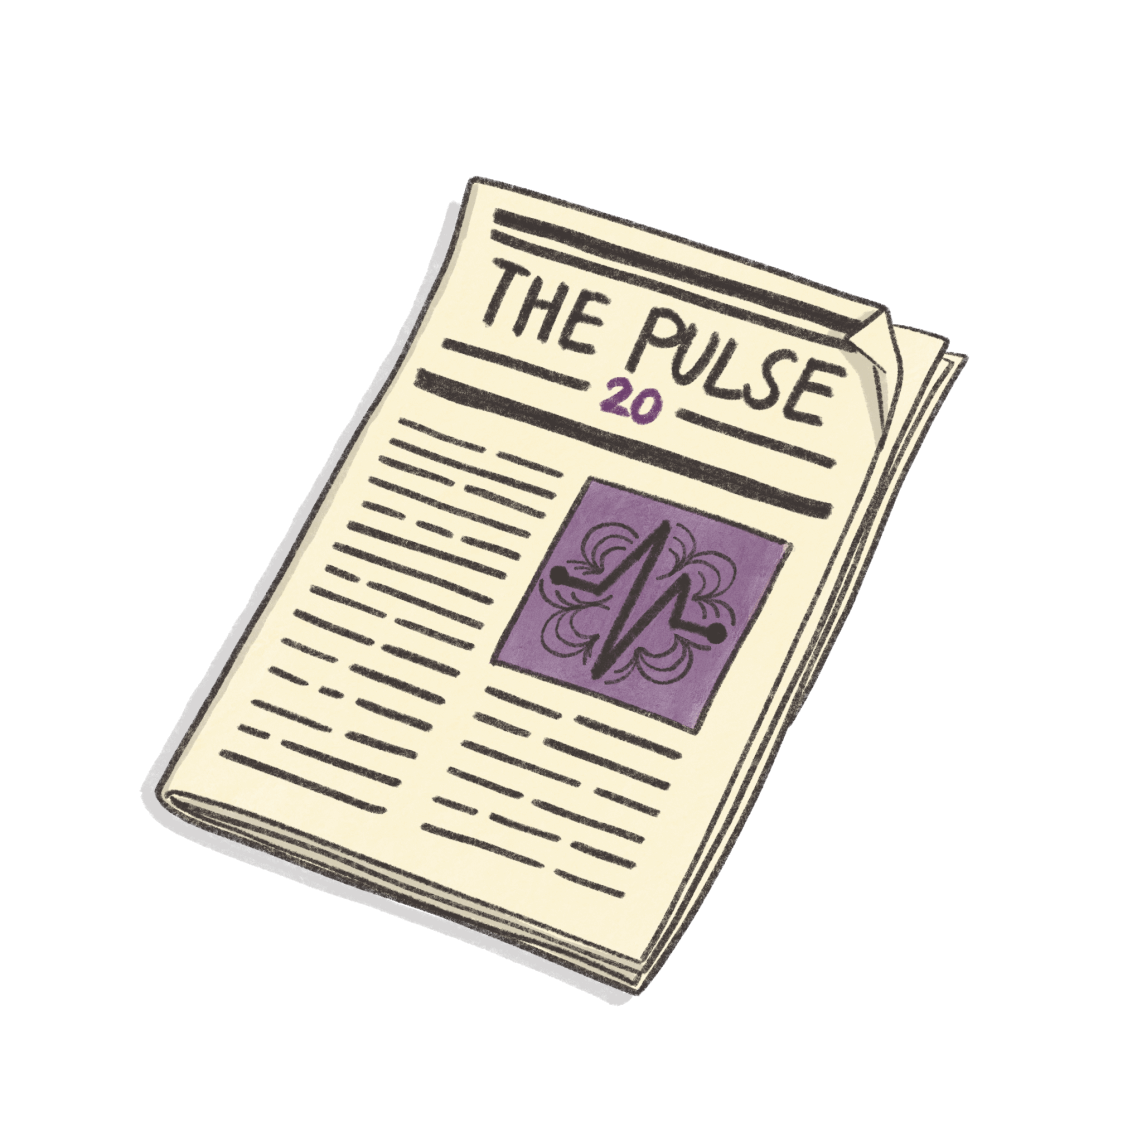 The Apoio Pulse – Issue 20